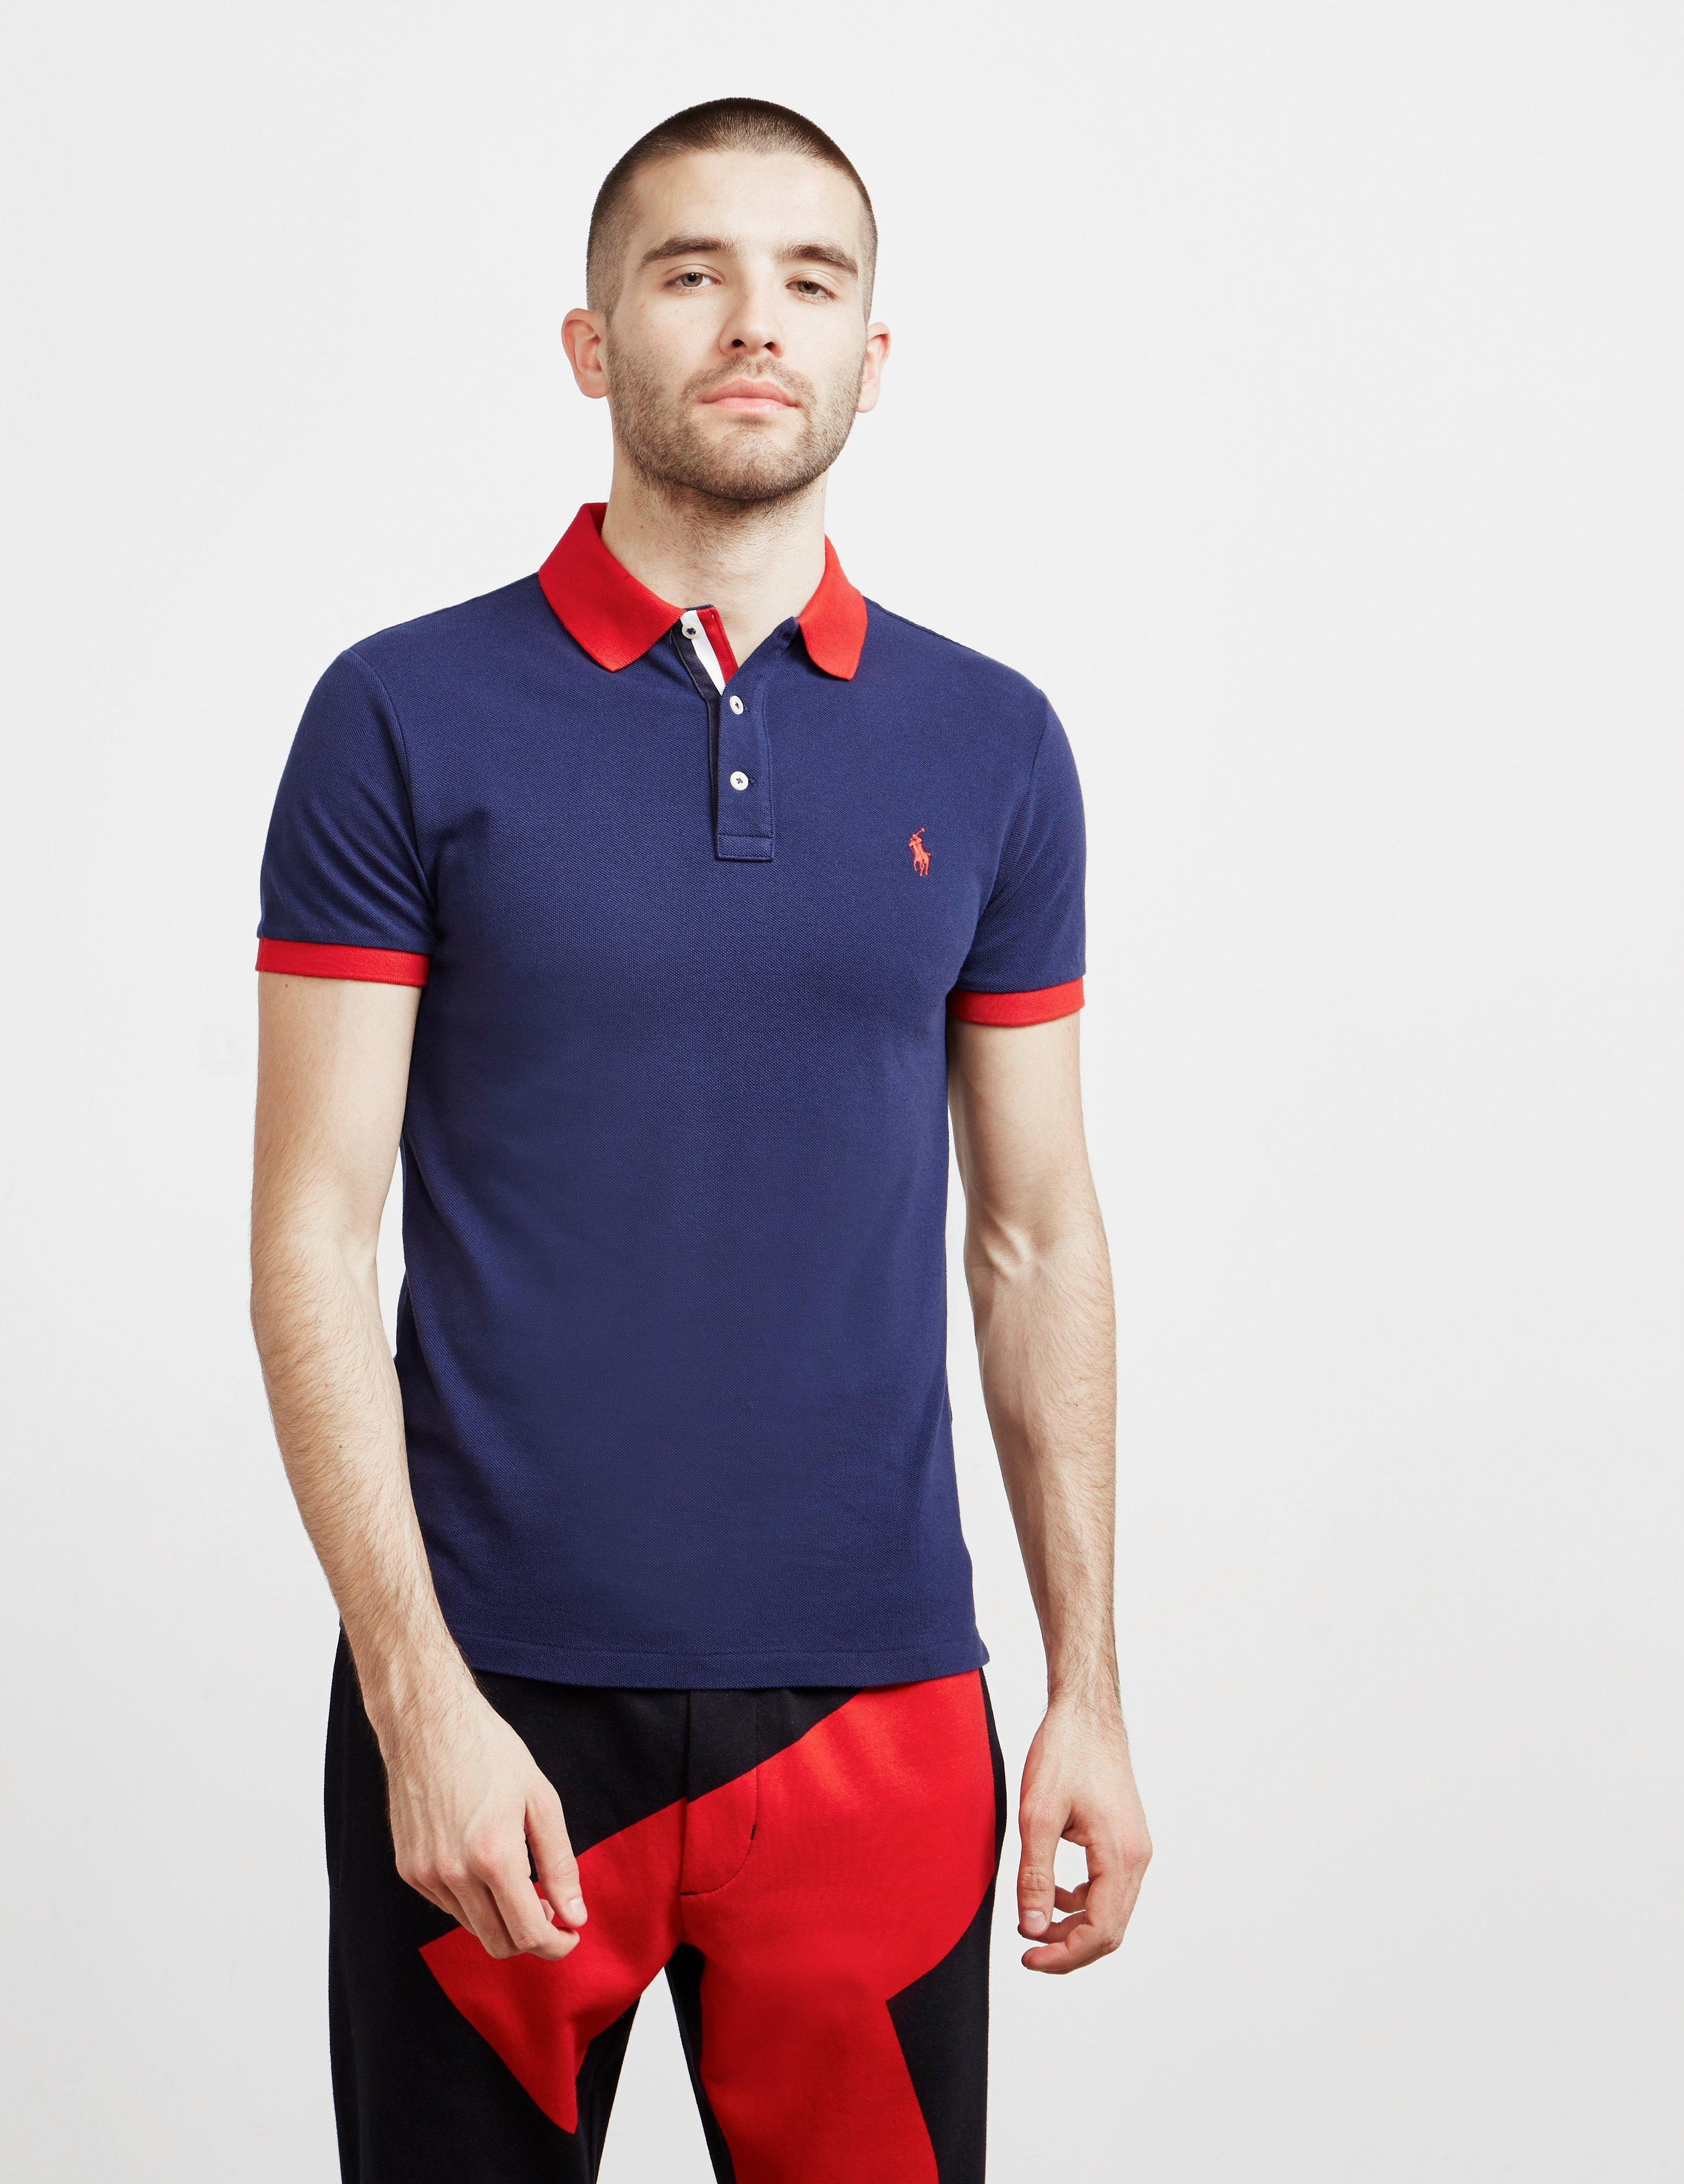 navy blue and red polo shirt